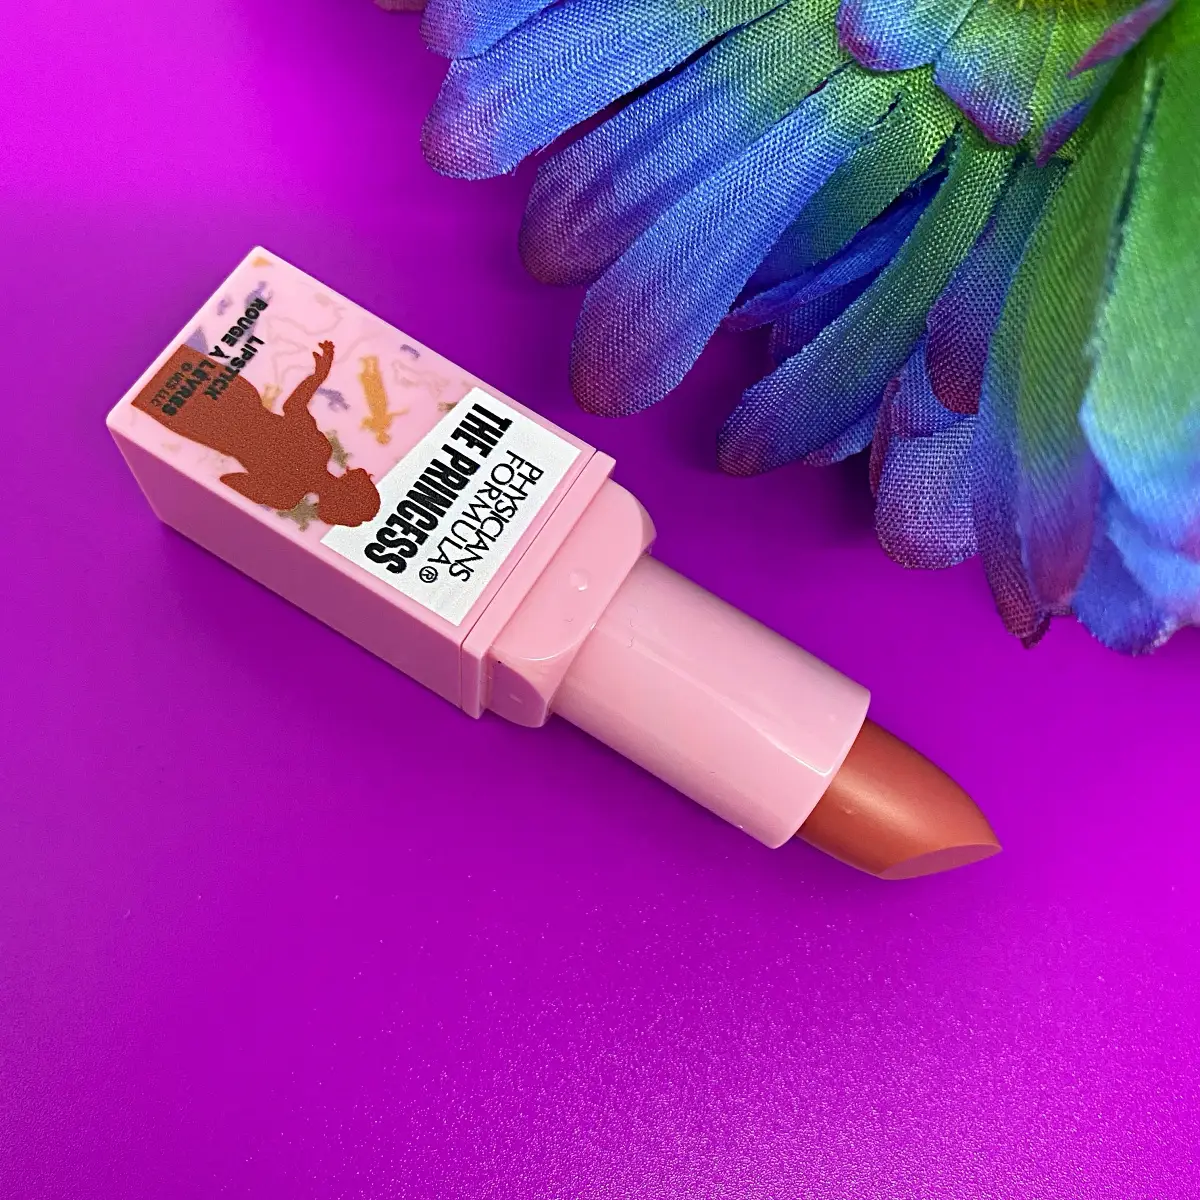 Physicians Formula The Breakfast Club The Princess Lipstick the word is an imperfect place